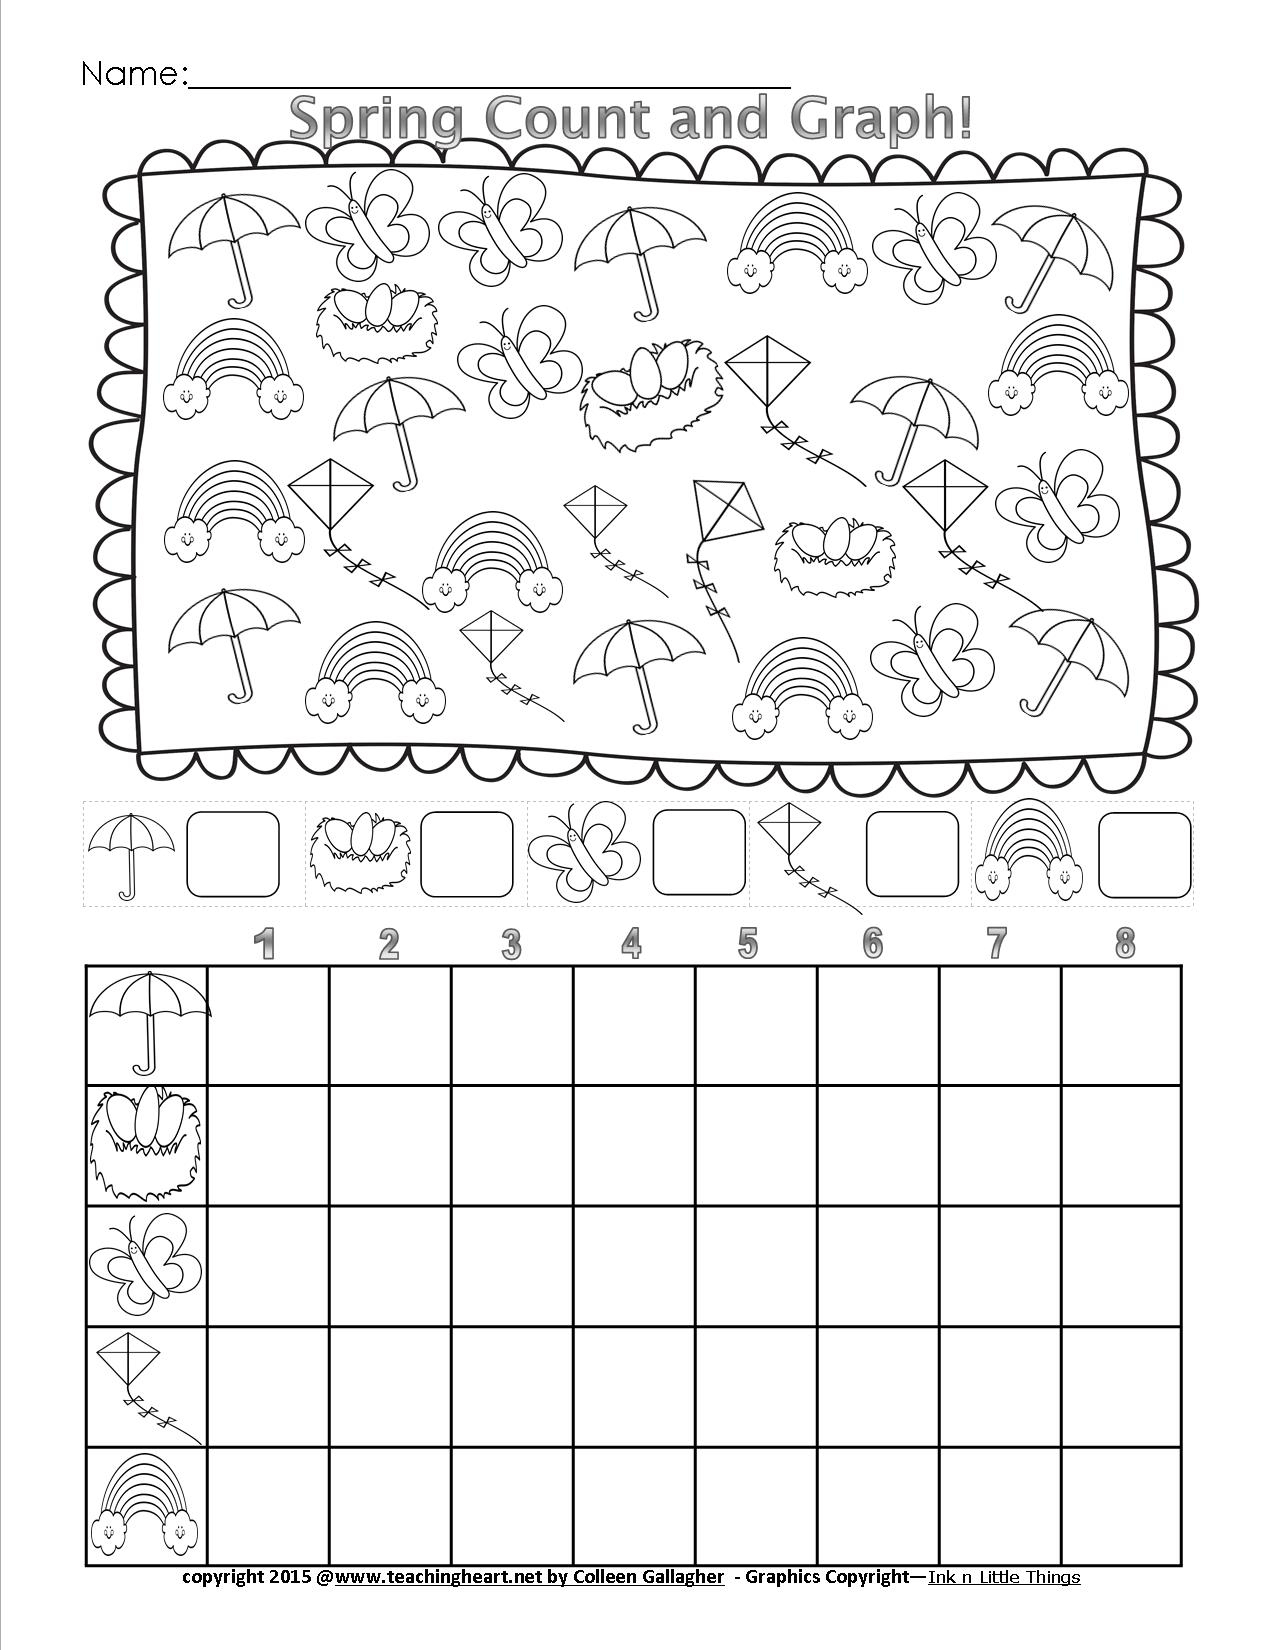 Spring Count And Graph - Free - Teaching Heart Blog Teaching Heart Blog | Free Printable Spring Worksheets For Elementary